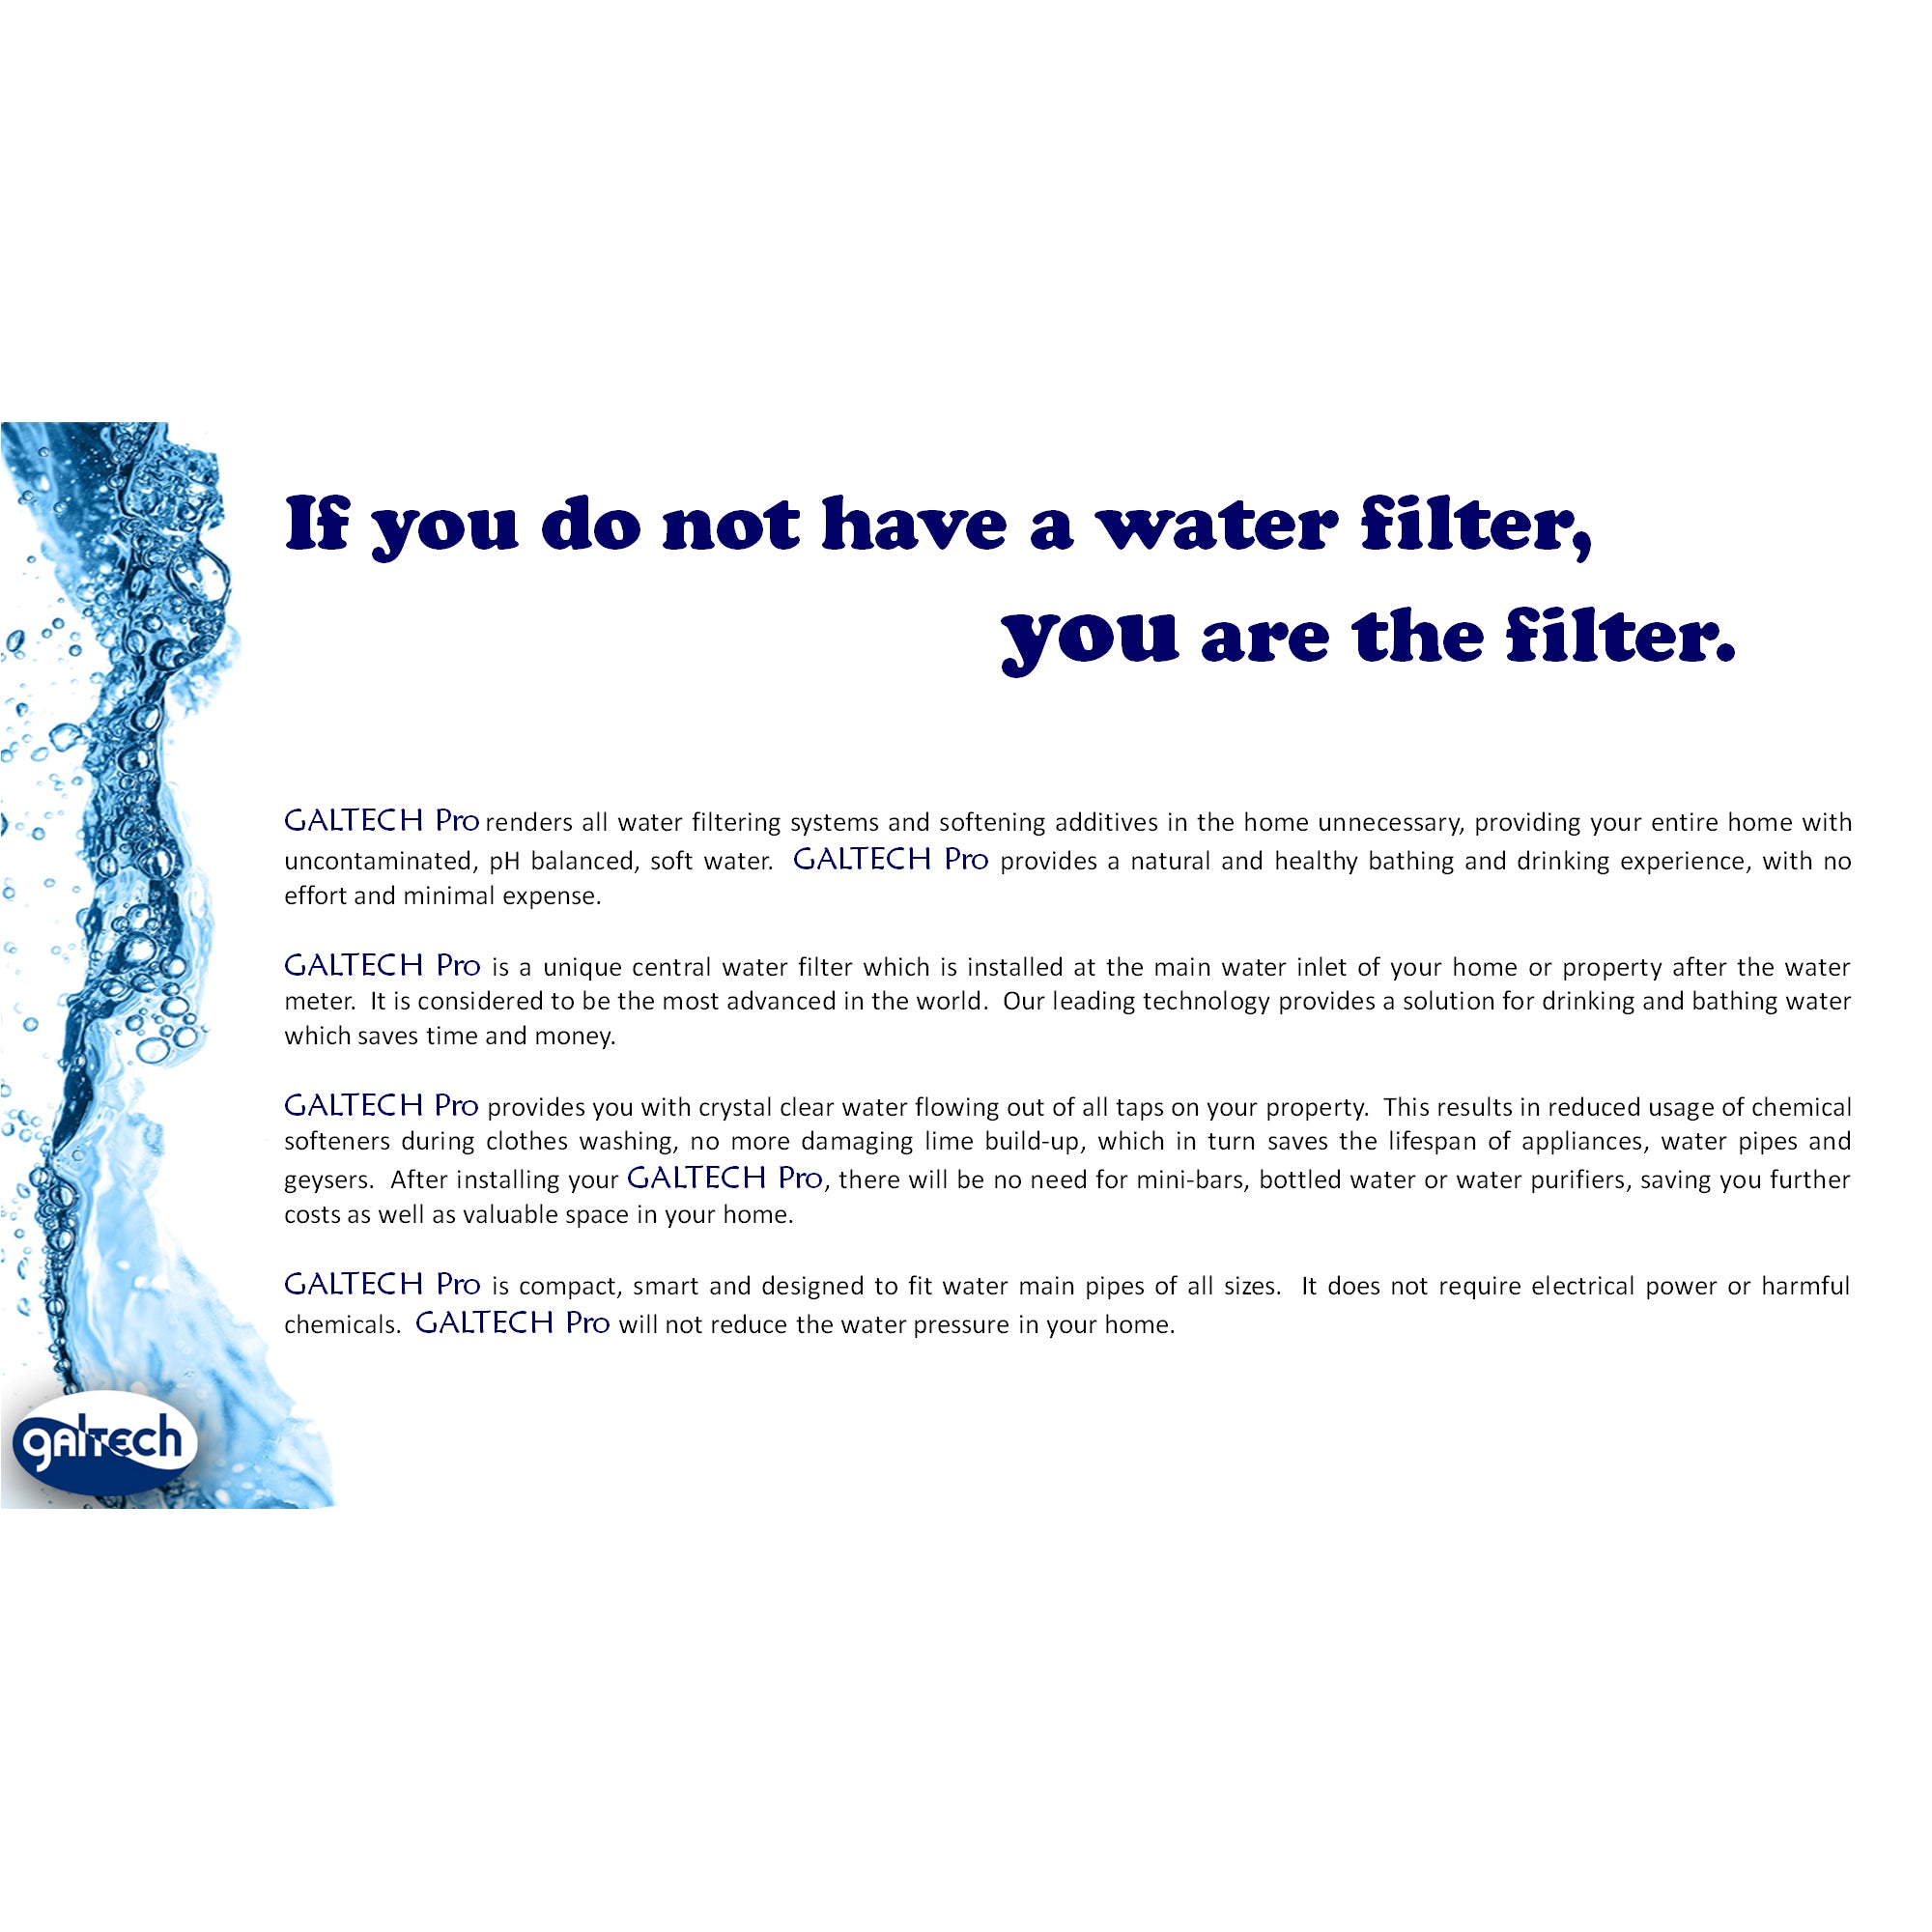 More About Galtech Pro Water Filtration System